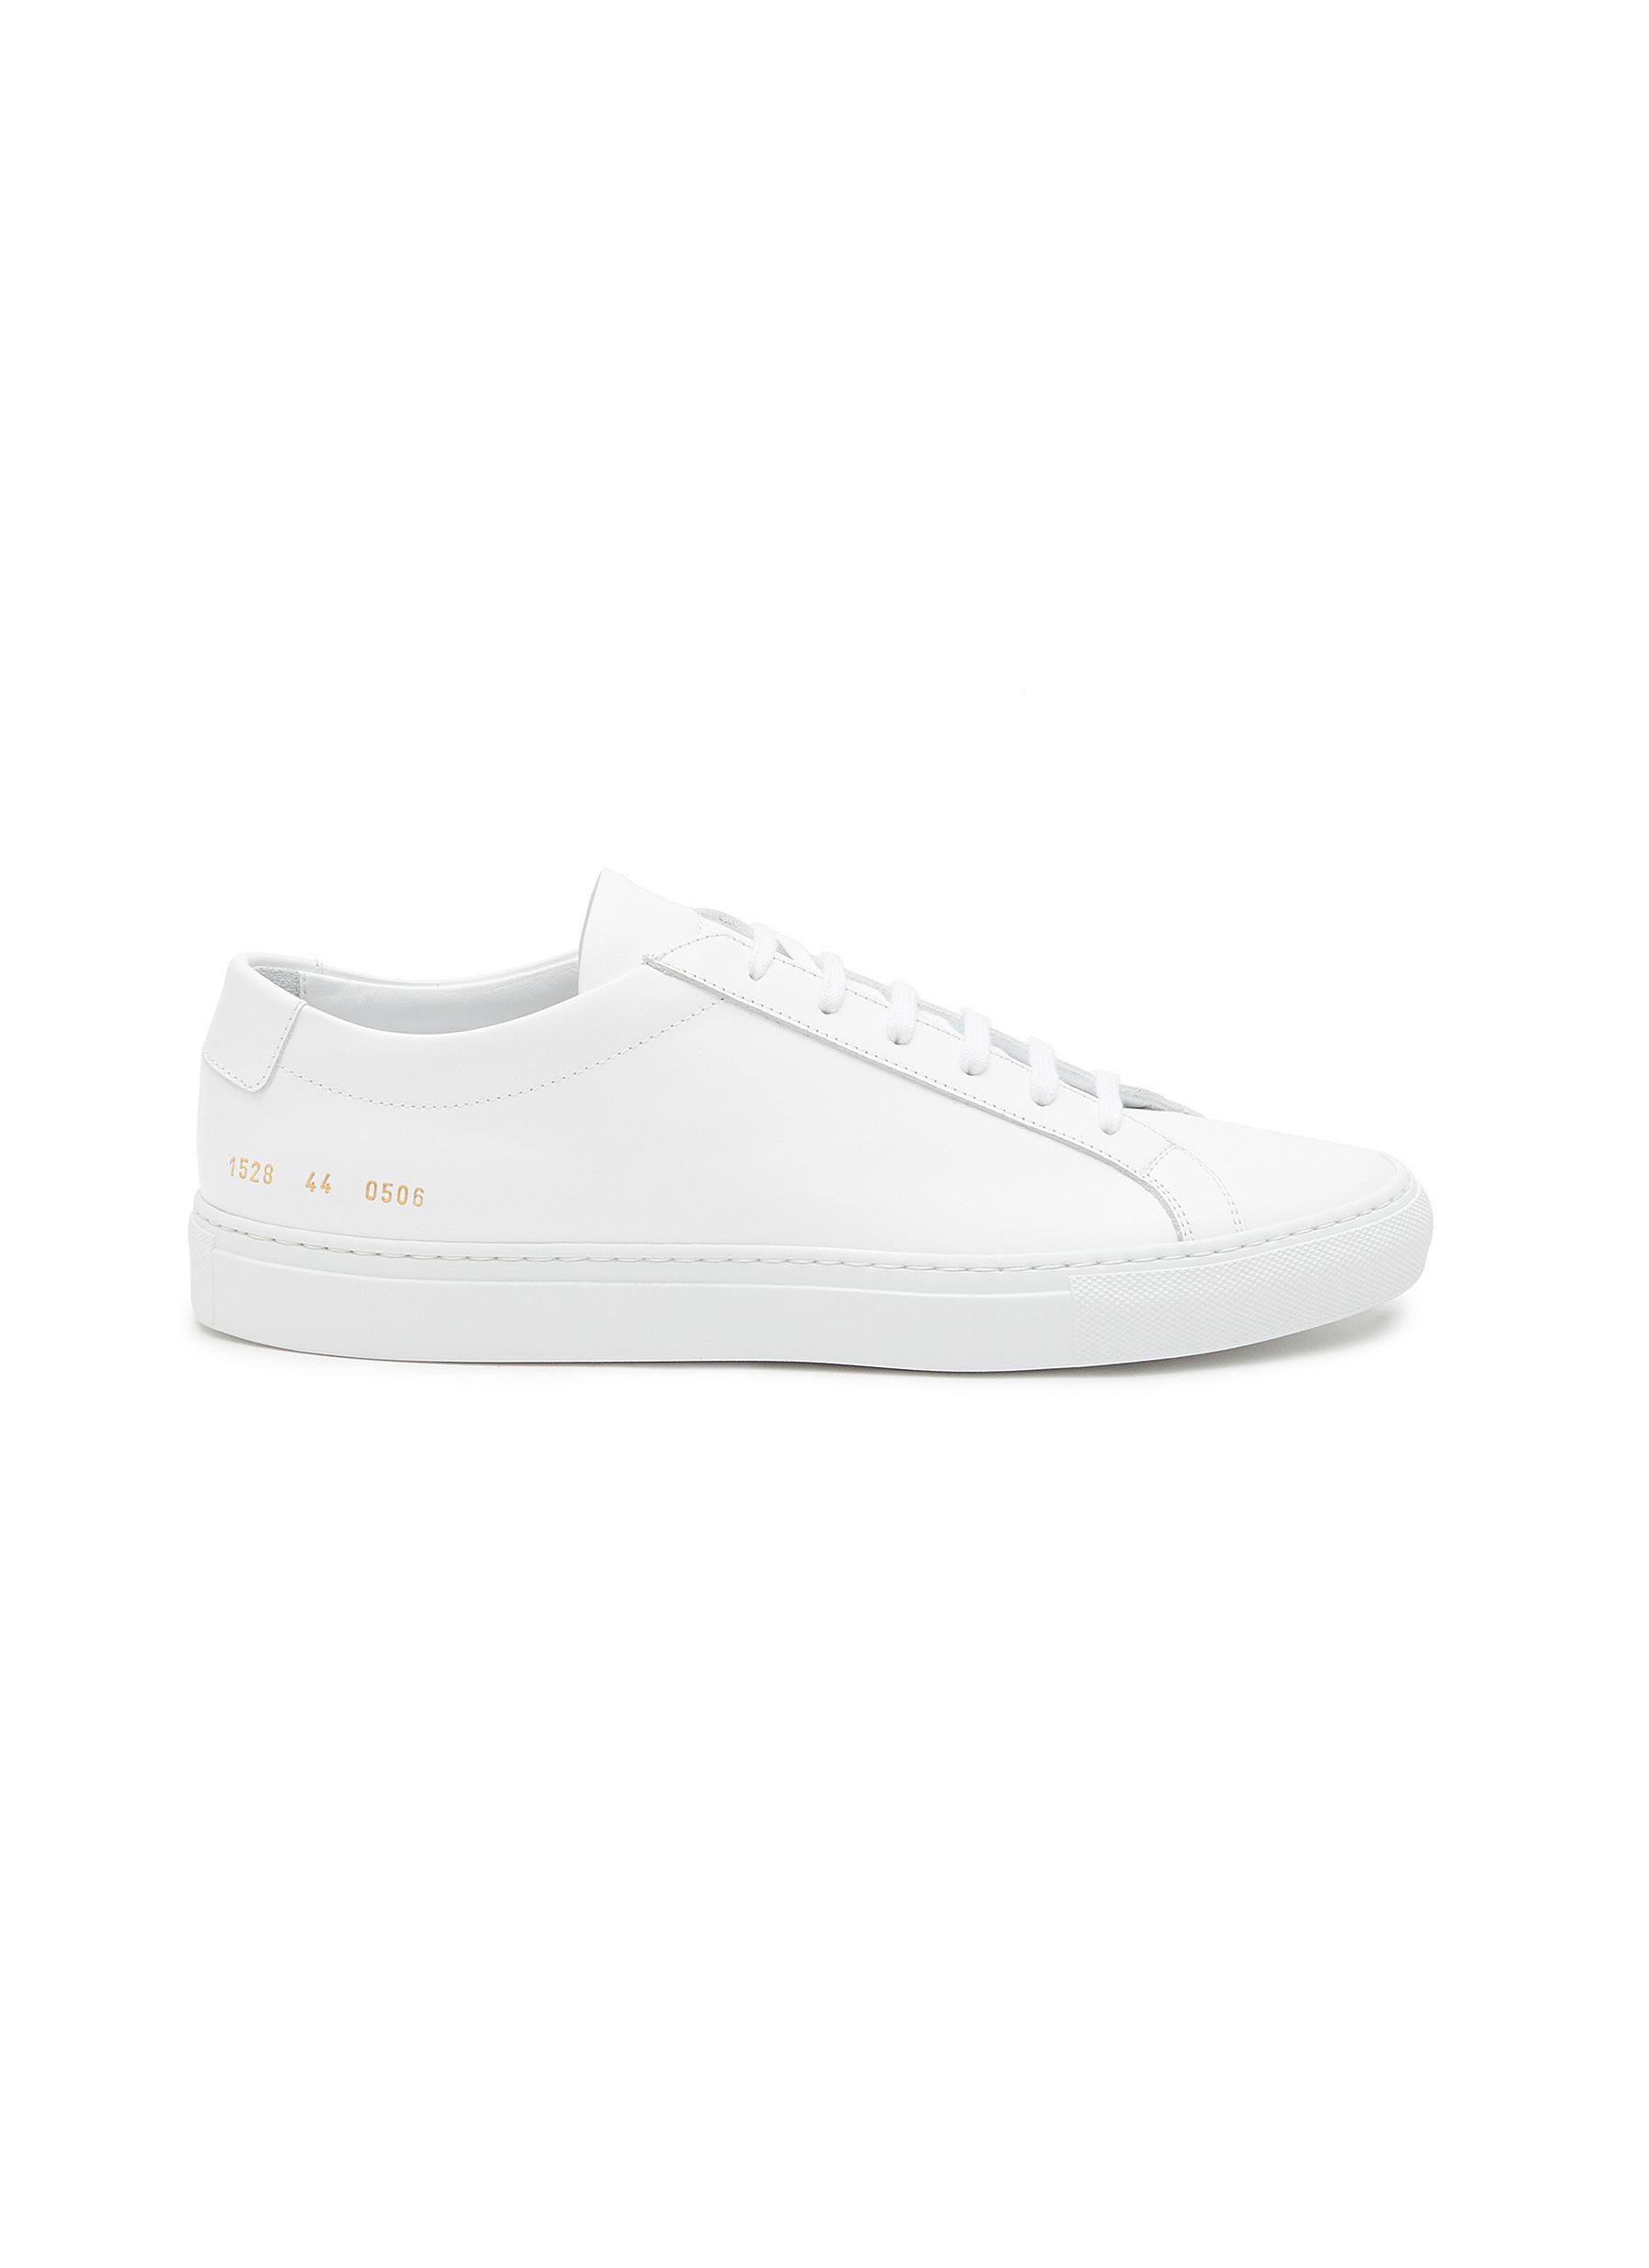 ‘Original Achilles' Leather Low-Top Sneakers